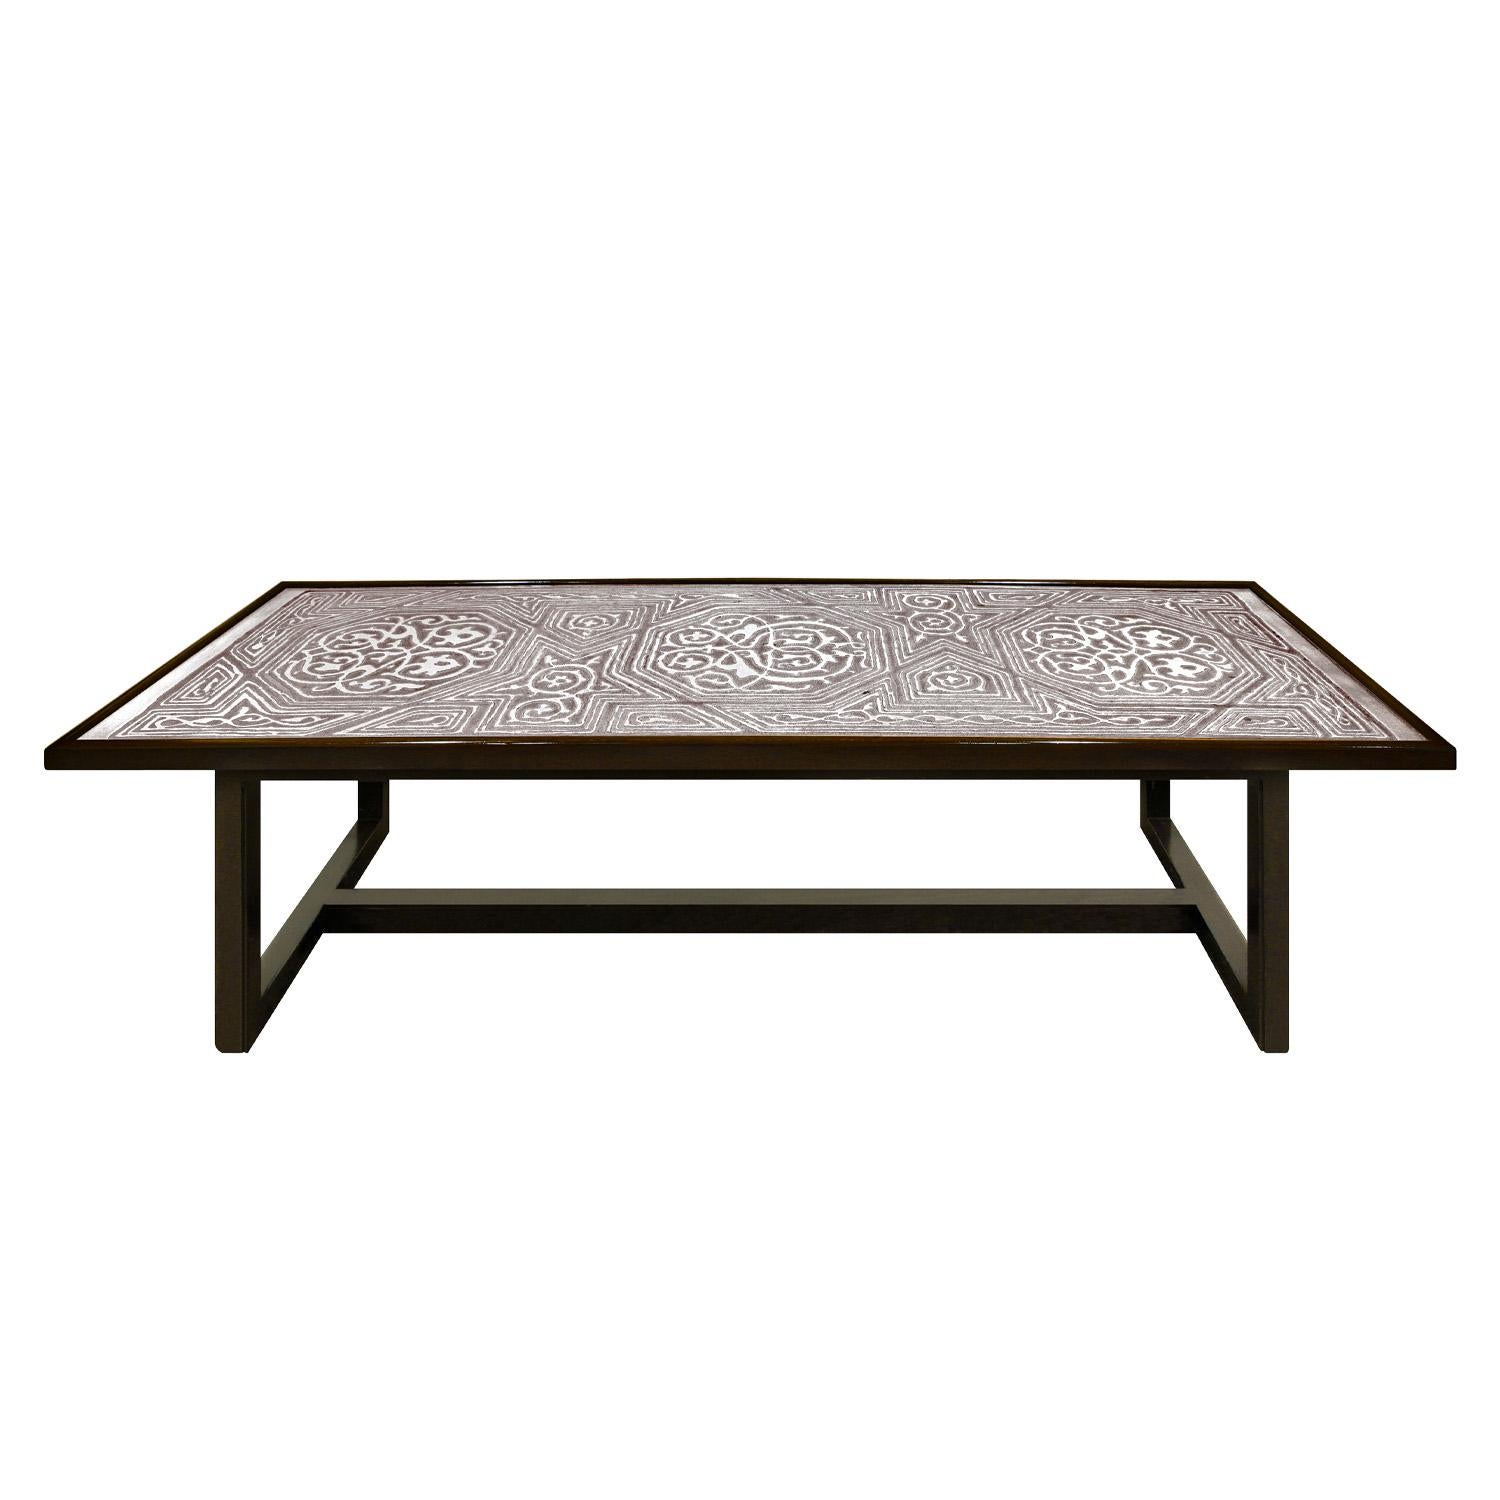 Mid-Century Modern Harvey Probber Rare Etched Pewter Top Coffee Table 1950s